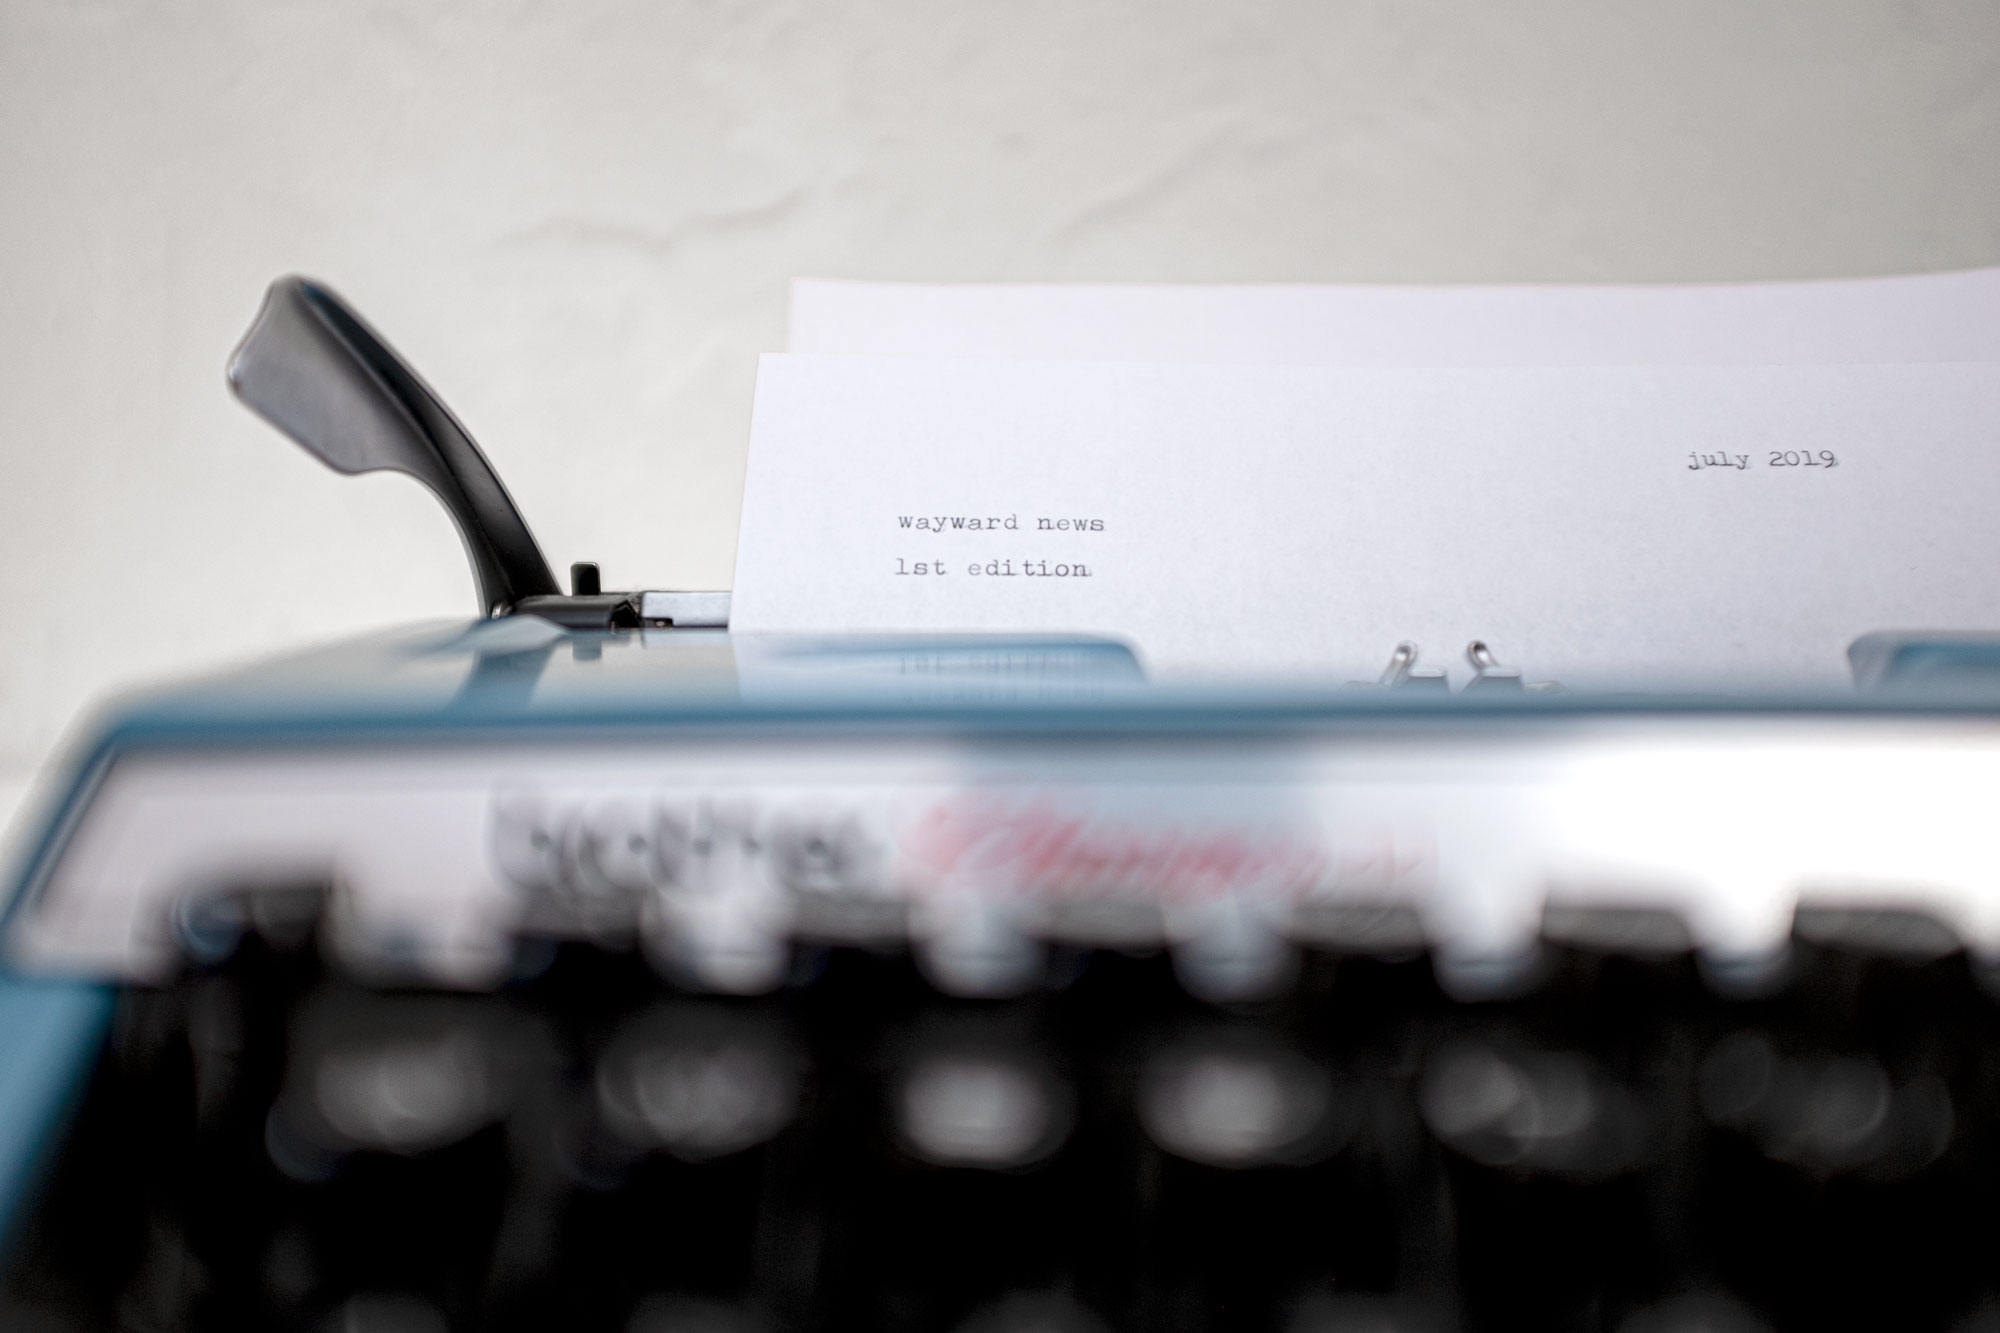 Typewriter with the words "wayward news" on the paper